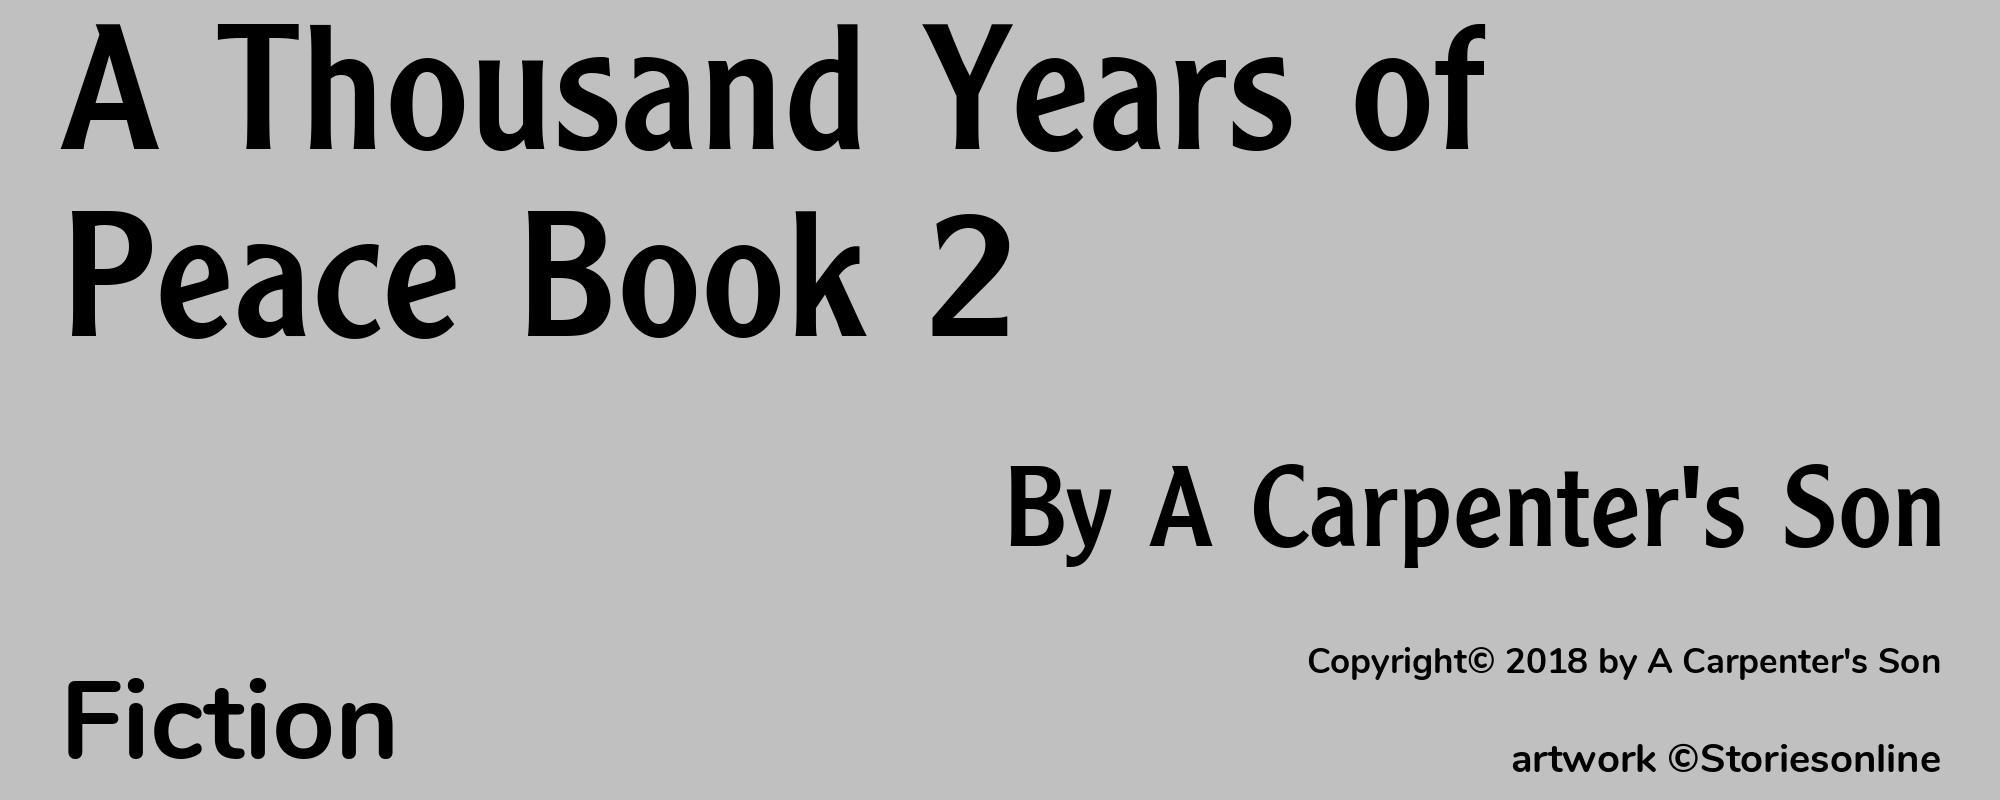 A Thousand Years of Peace Book 2 - Cover